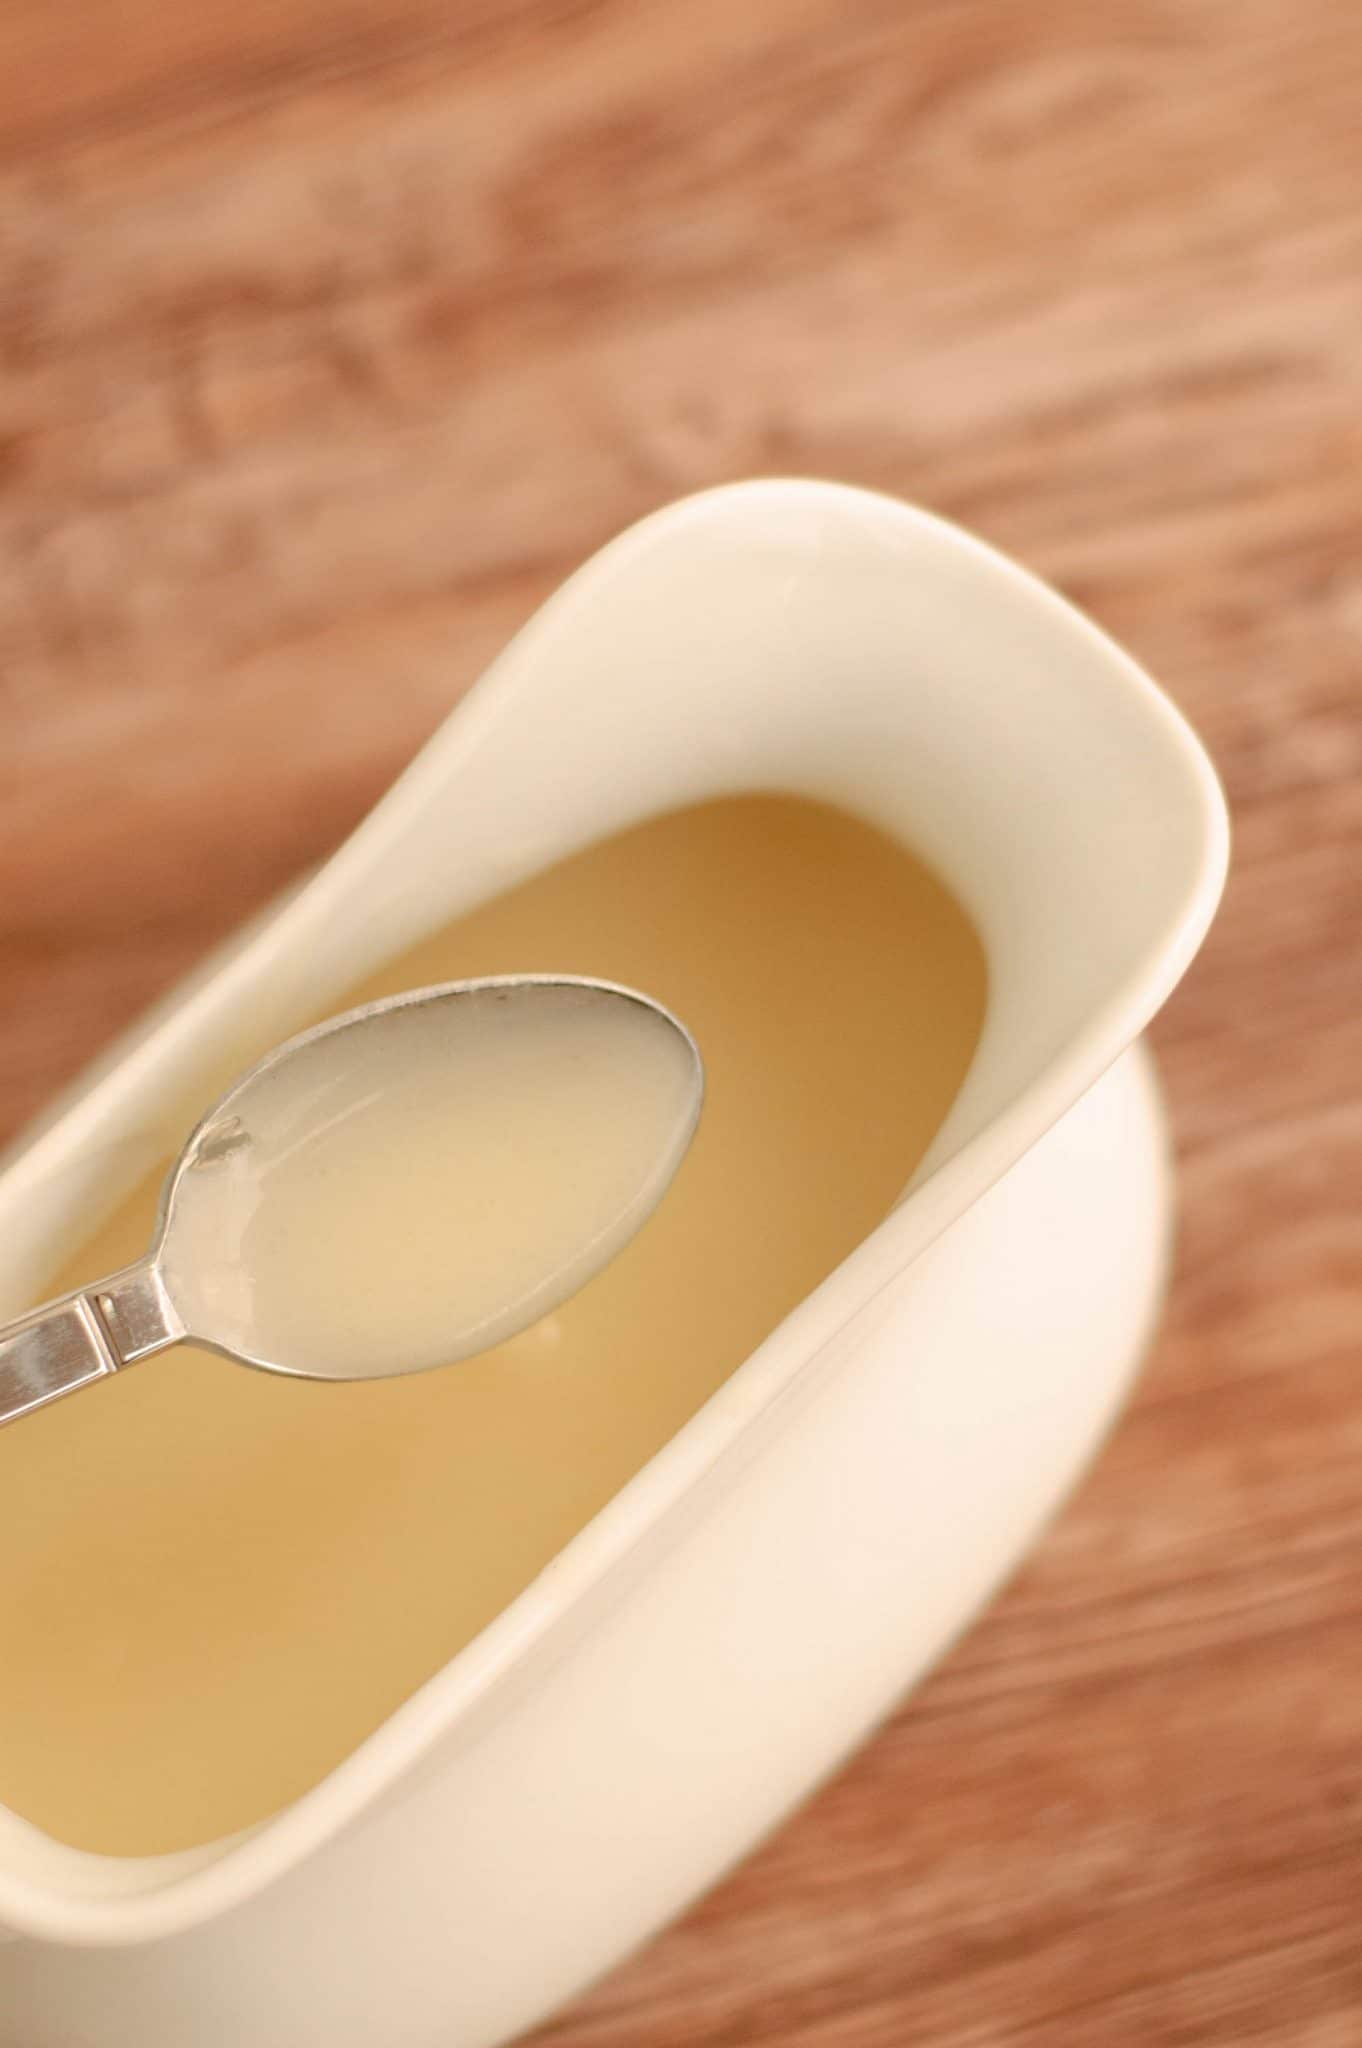 A spoon lifting veloute out of a gravy boat showing the texture and consistency.